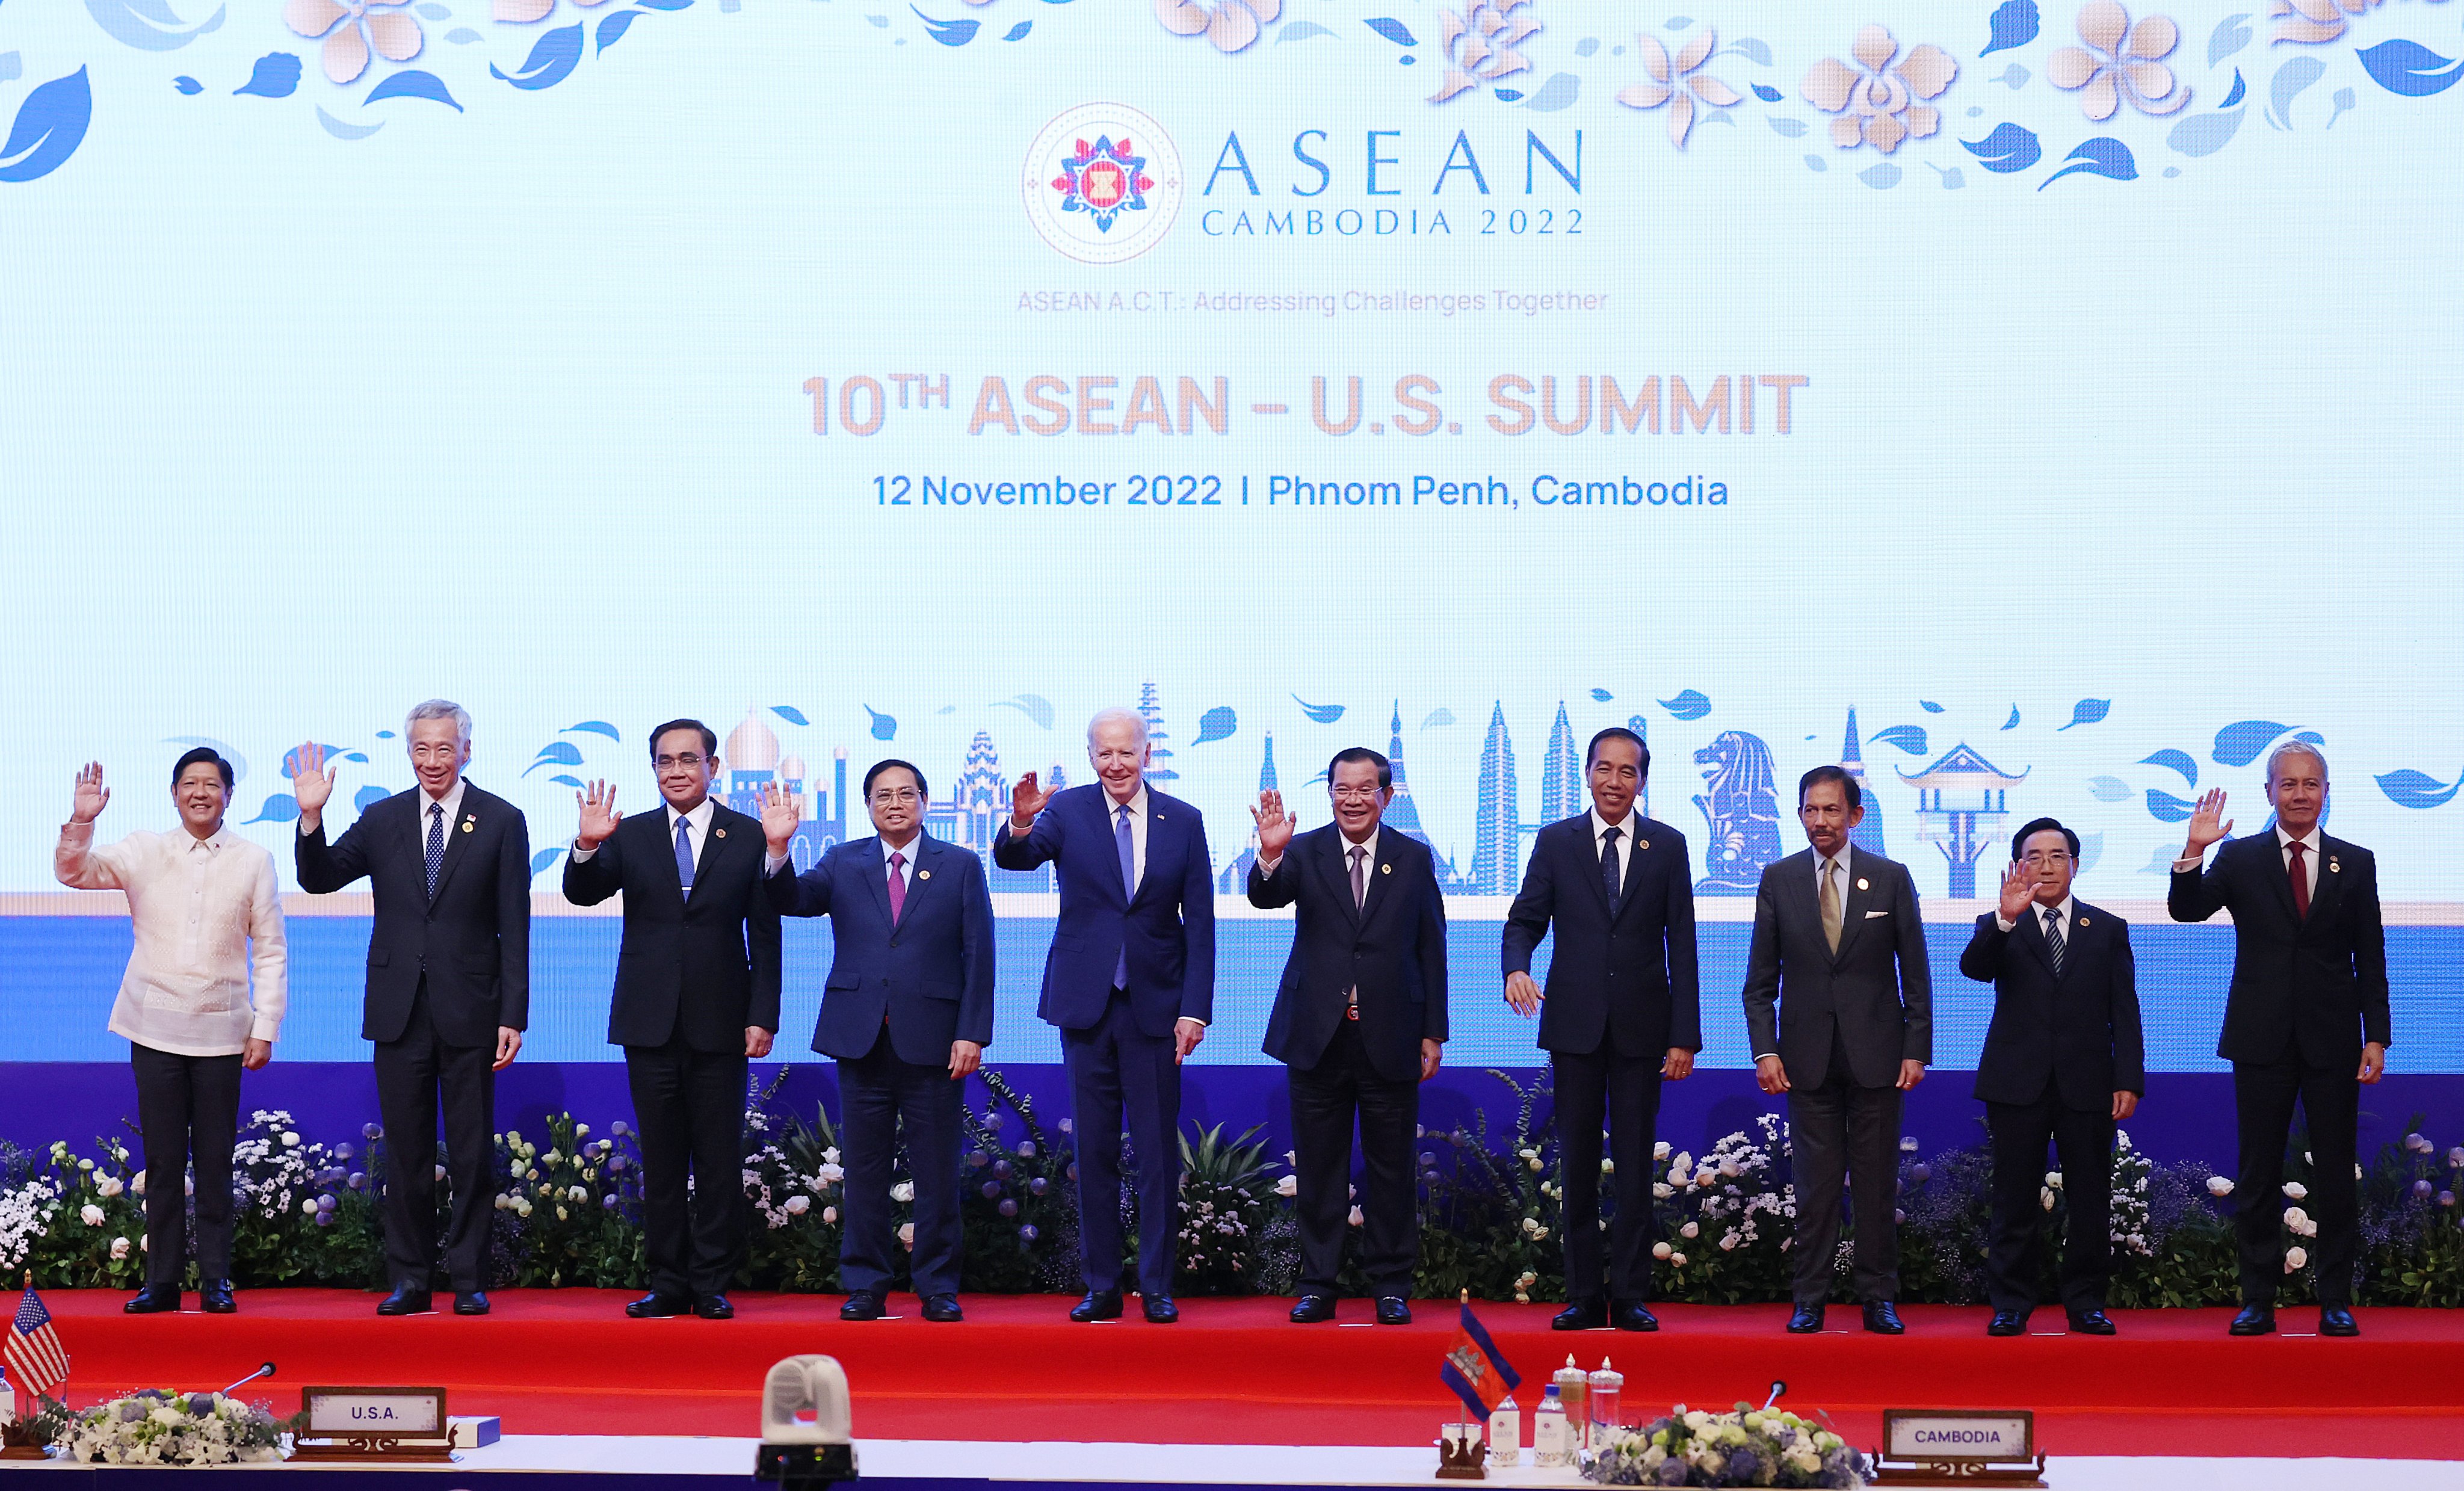 Implementing ASEAN A.C.T. under Cambodia's chairmanship